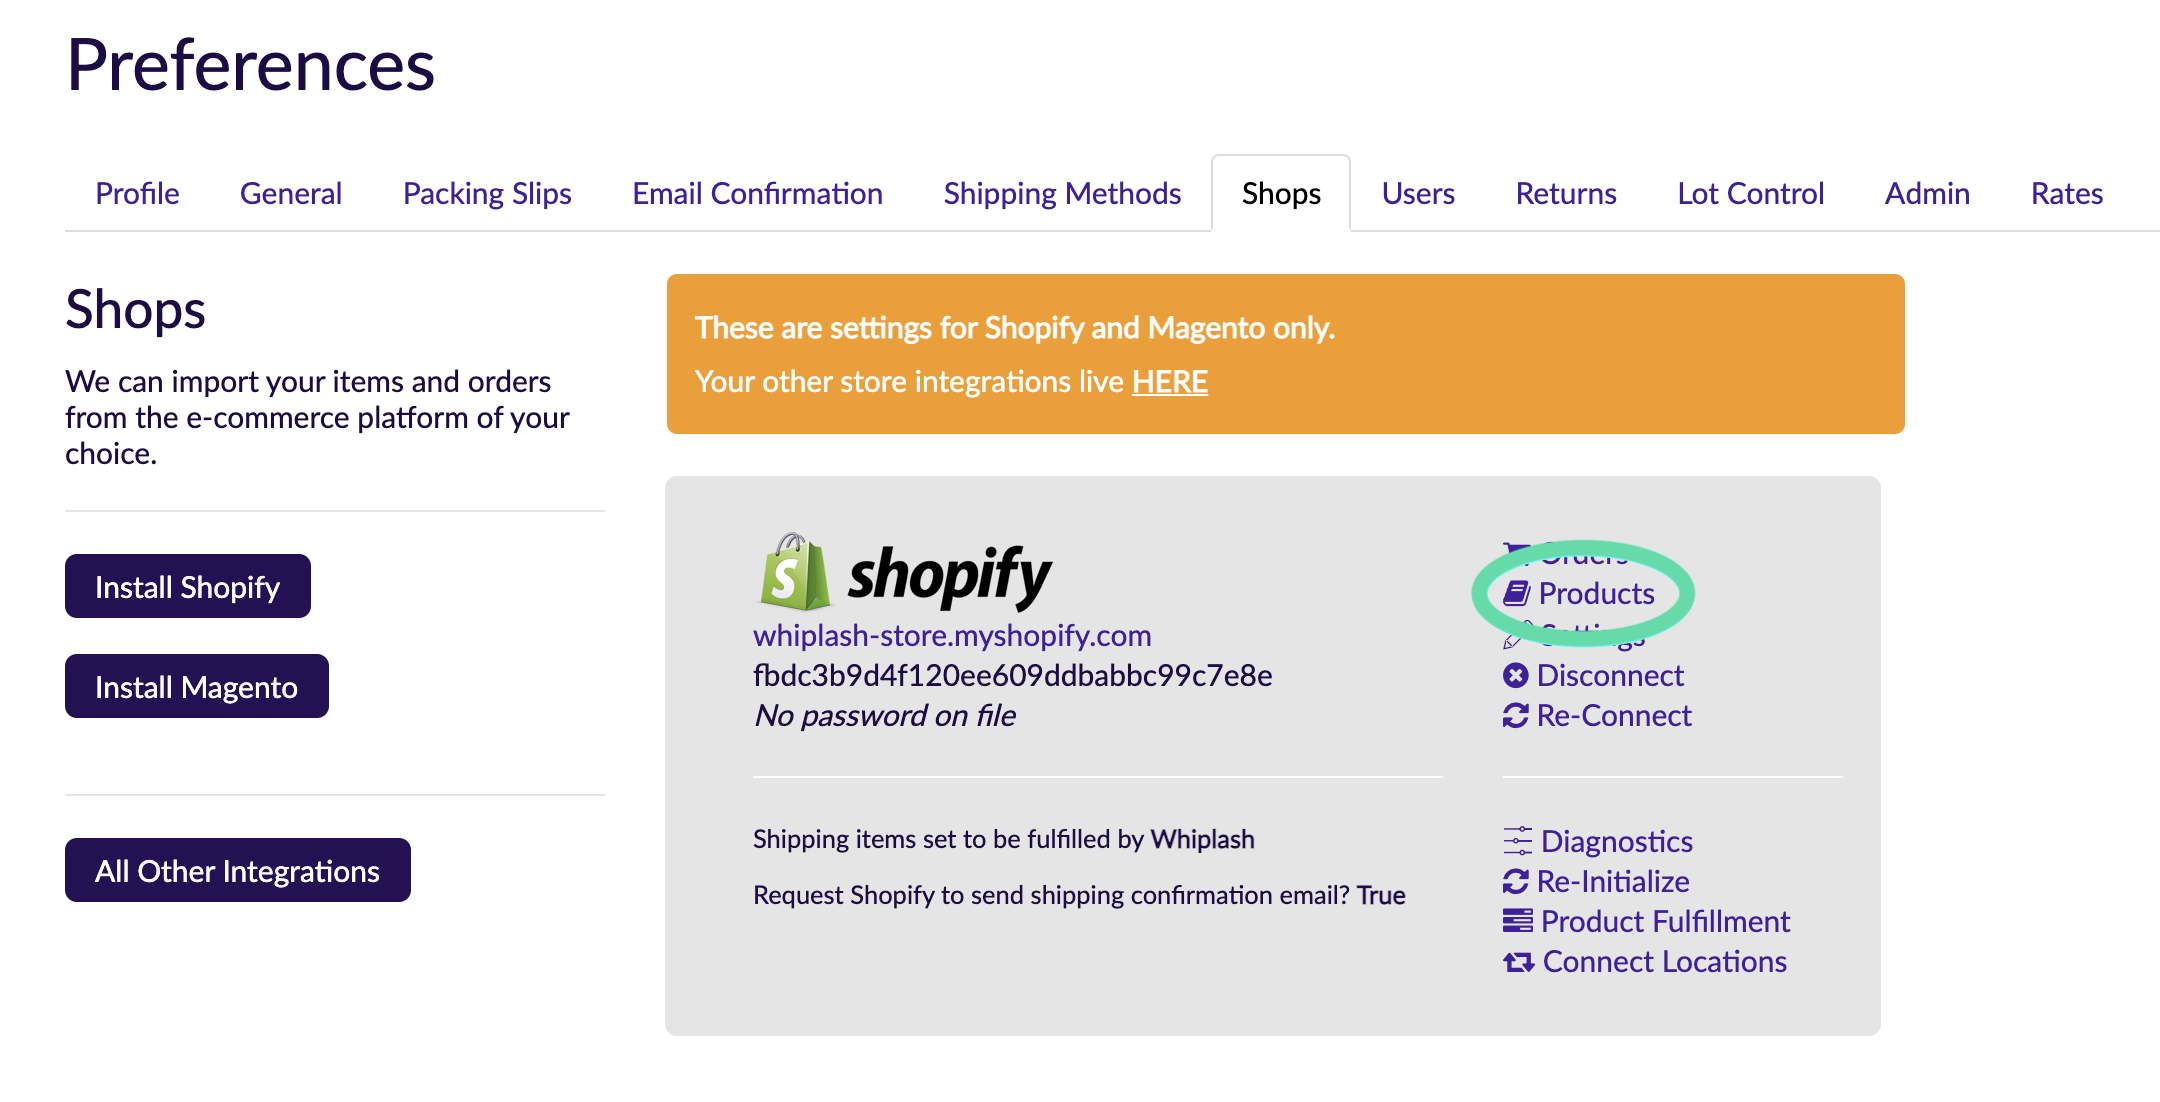 shopify_integration_preferences_page__products_.png